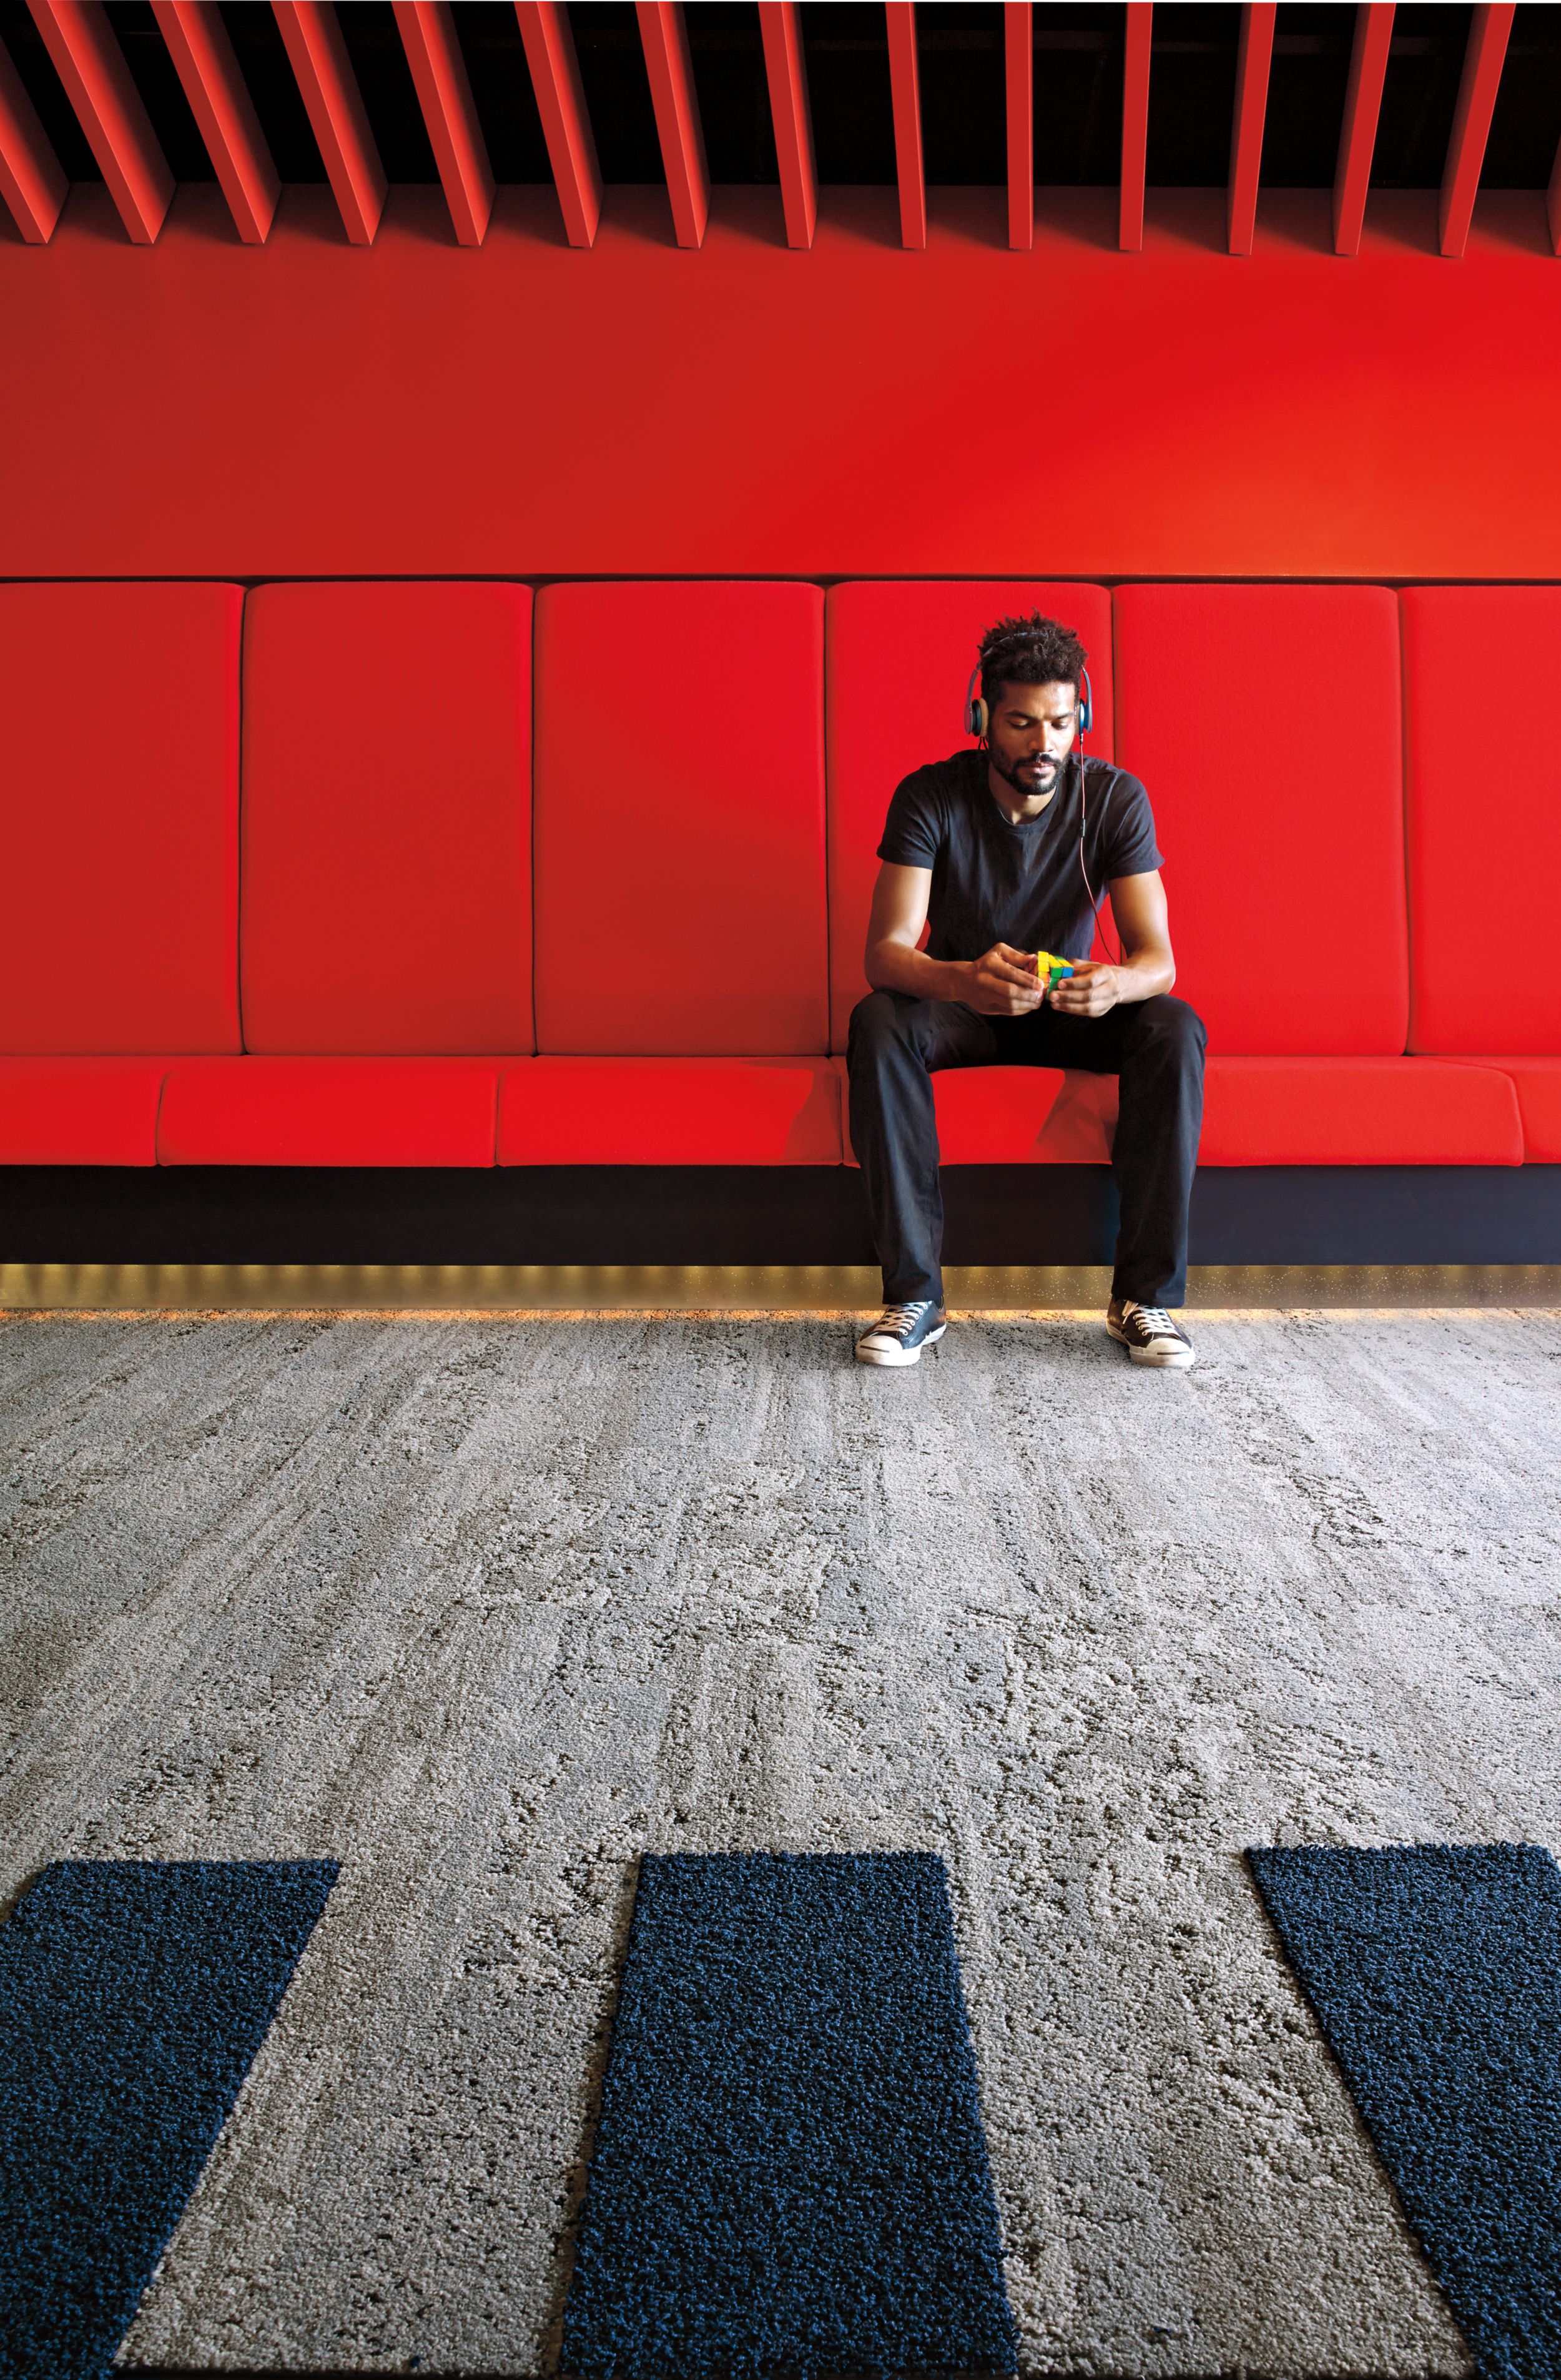 Interface HN810 plank carpet tile in waiting area with red bench and wall and man listening to music Bildnummer 7